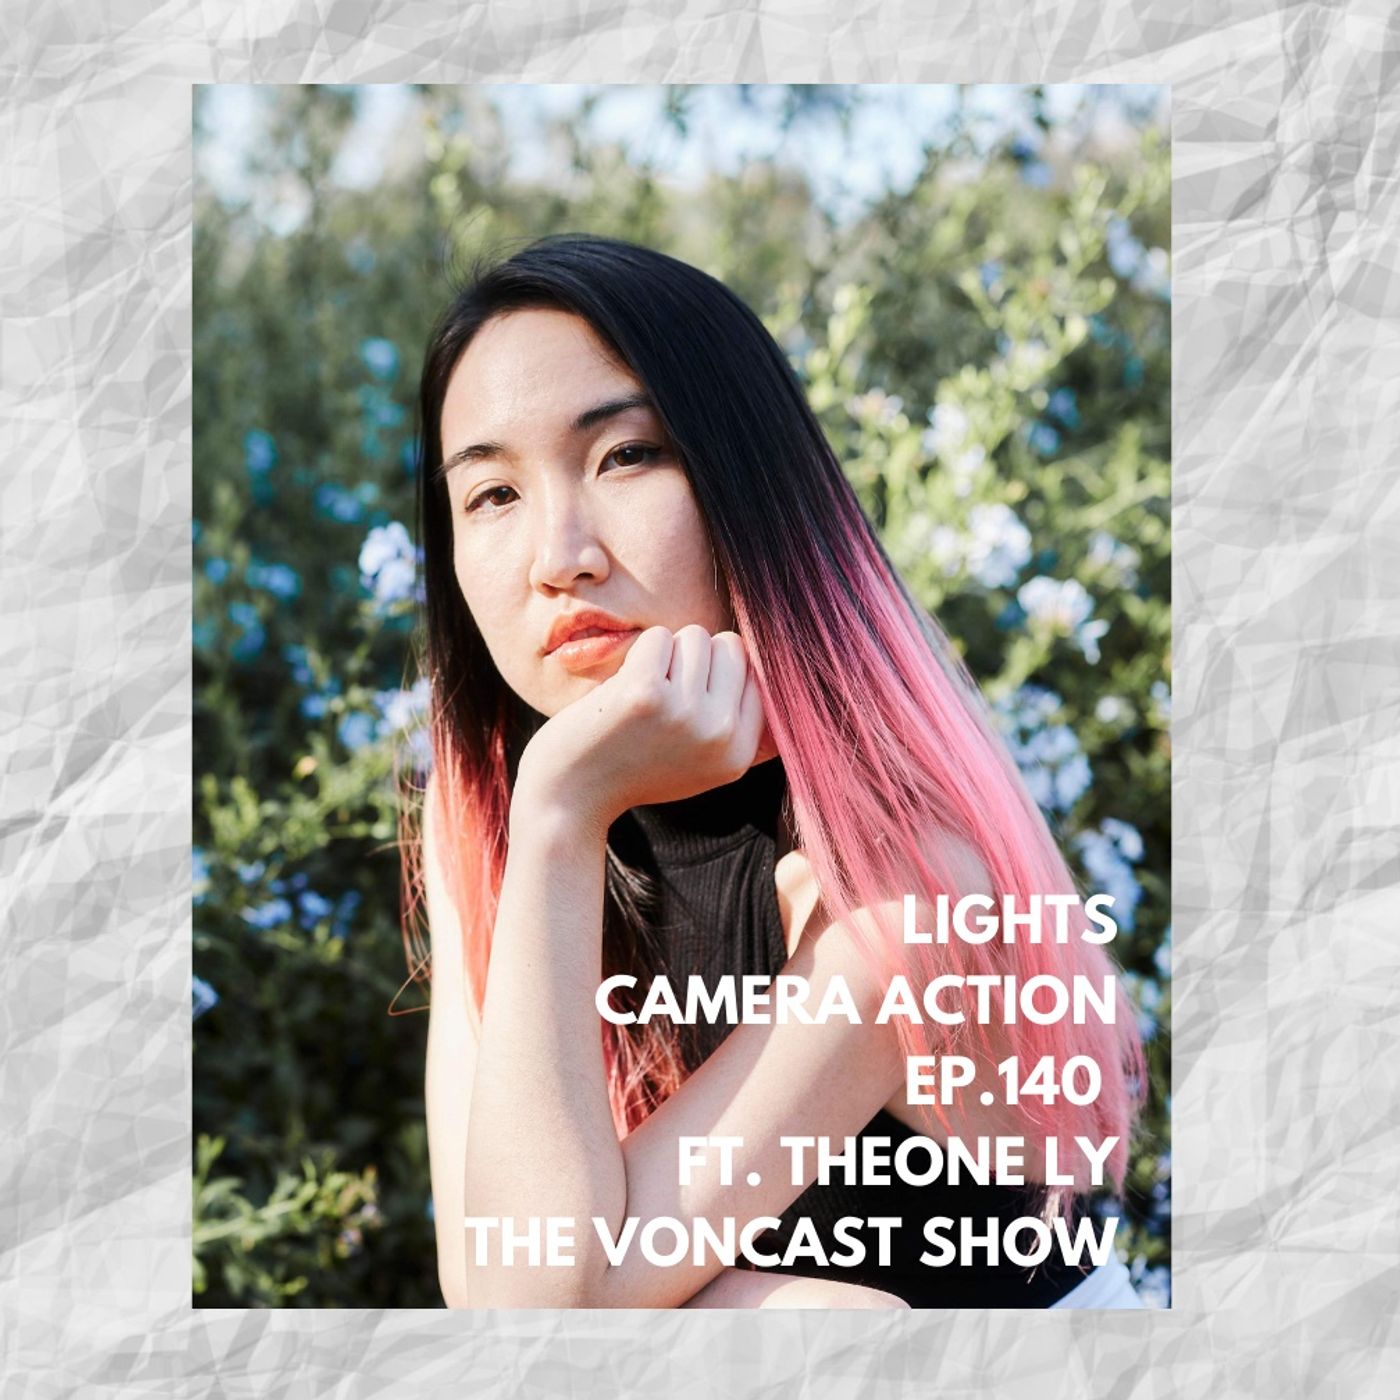 Ep. 140 Lights Camera Action ft. Theone Ly